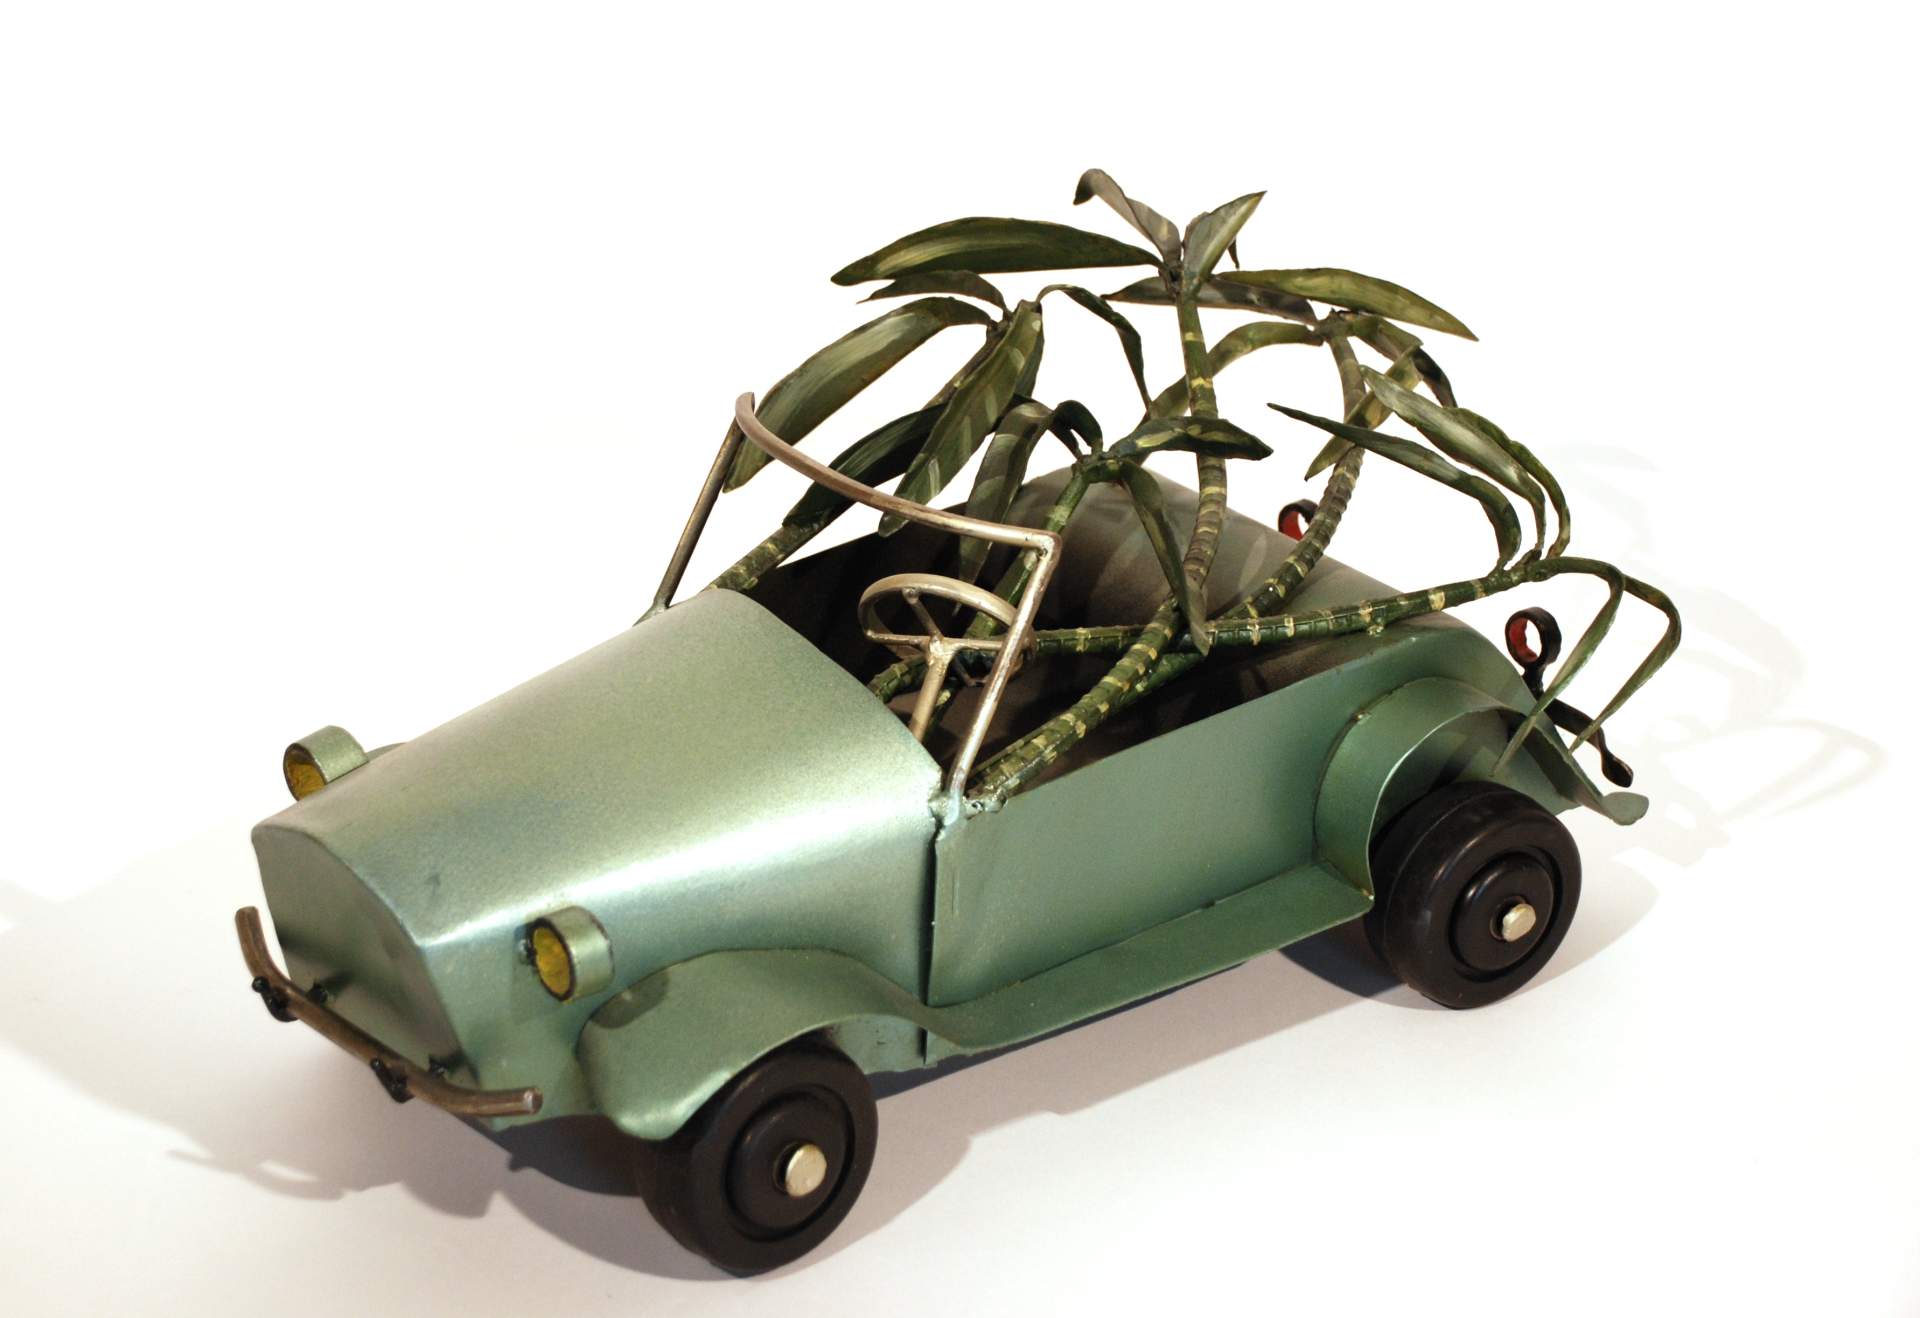 Export Crop-- Sugar Cane in a Convertible, from the series, Convalescing Staple Crops & Recreational Export Crops